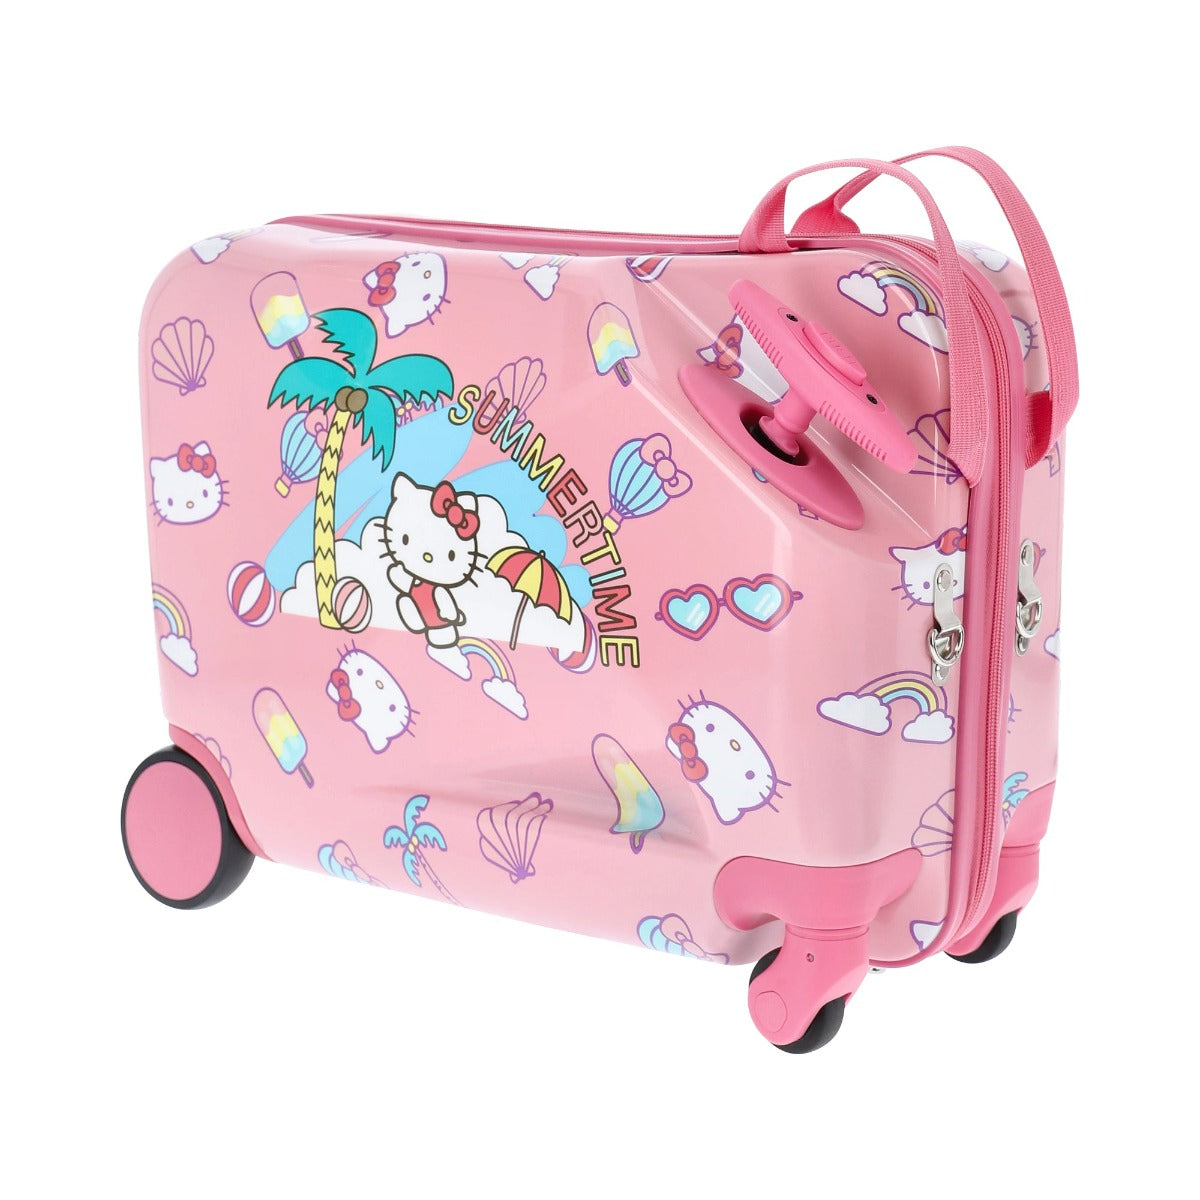 Pink Hello Kitty Ride-on Summer Time 14.5" luggage for kids travel